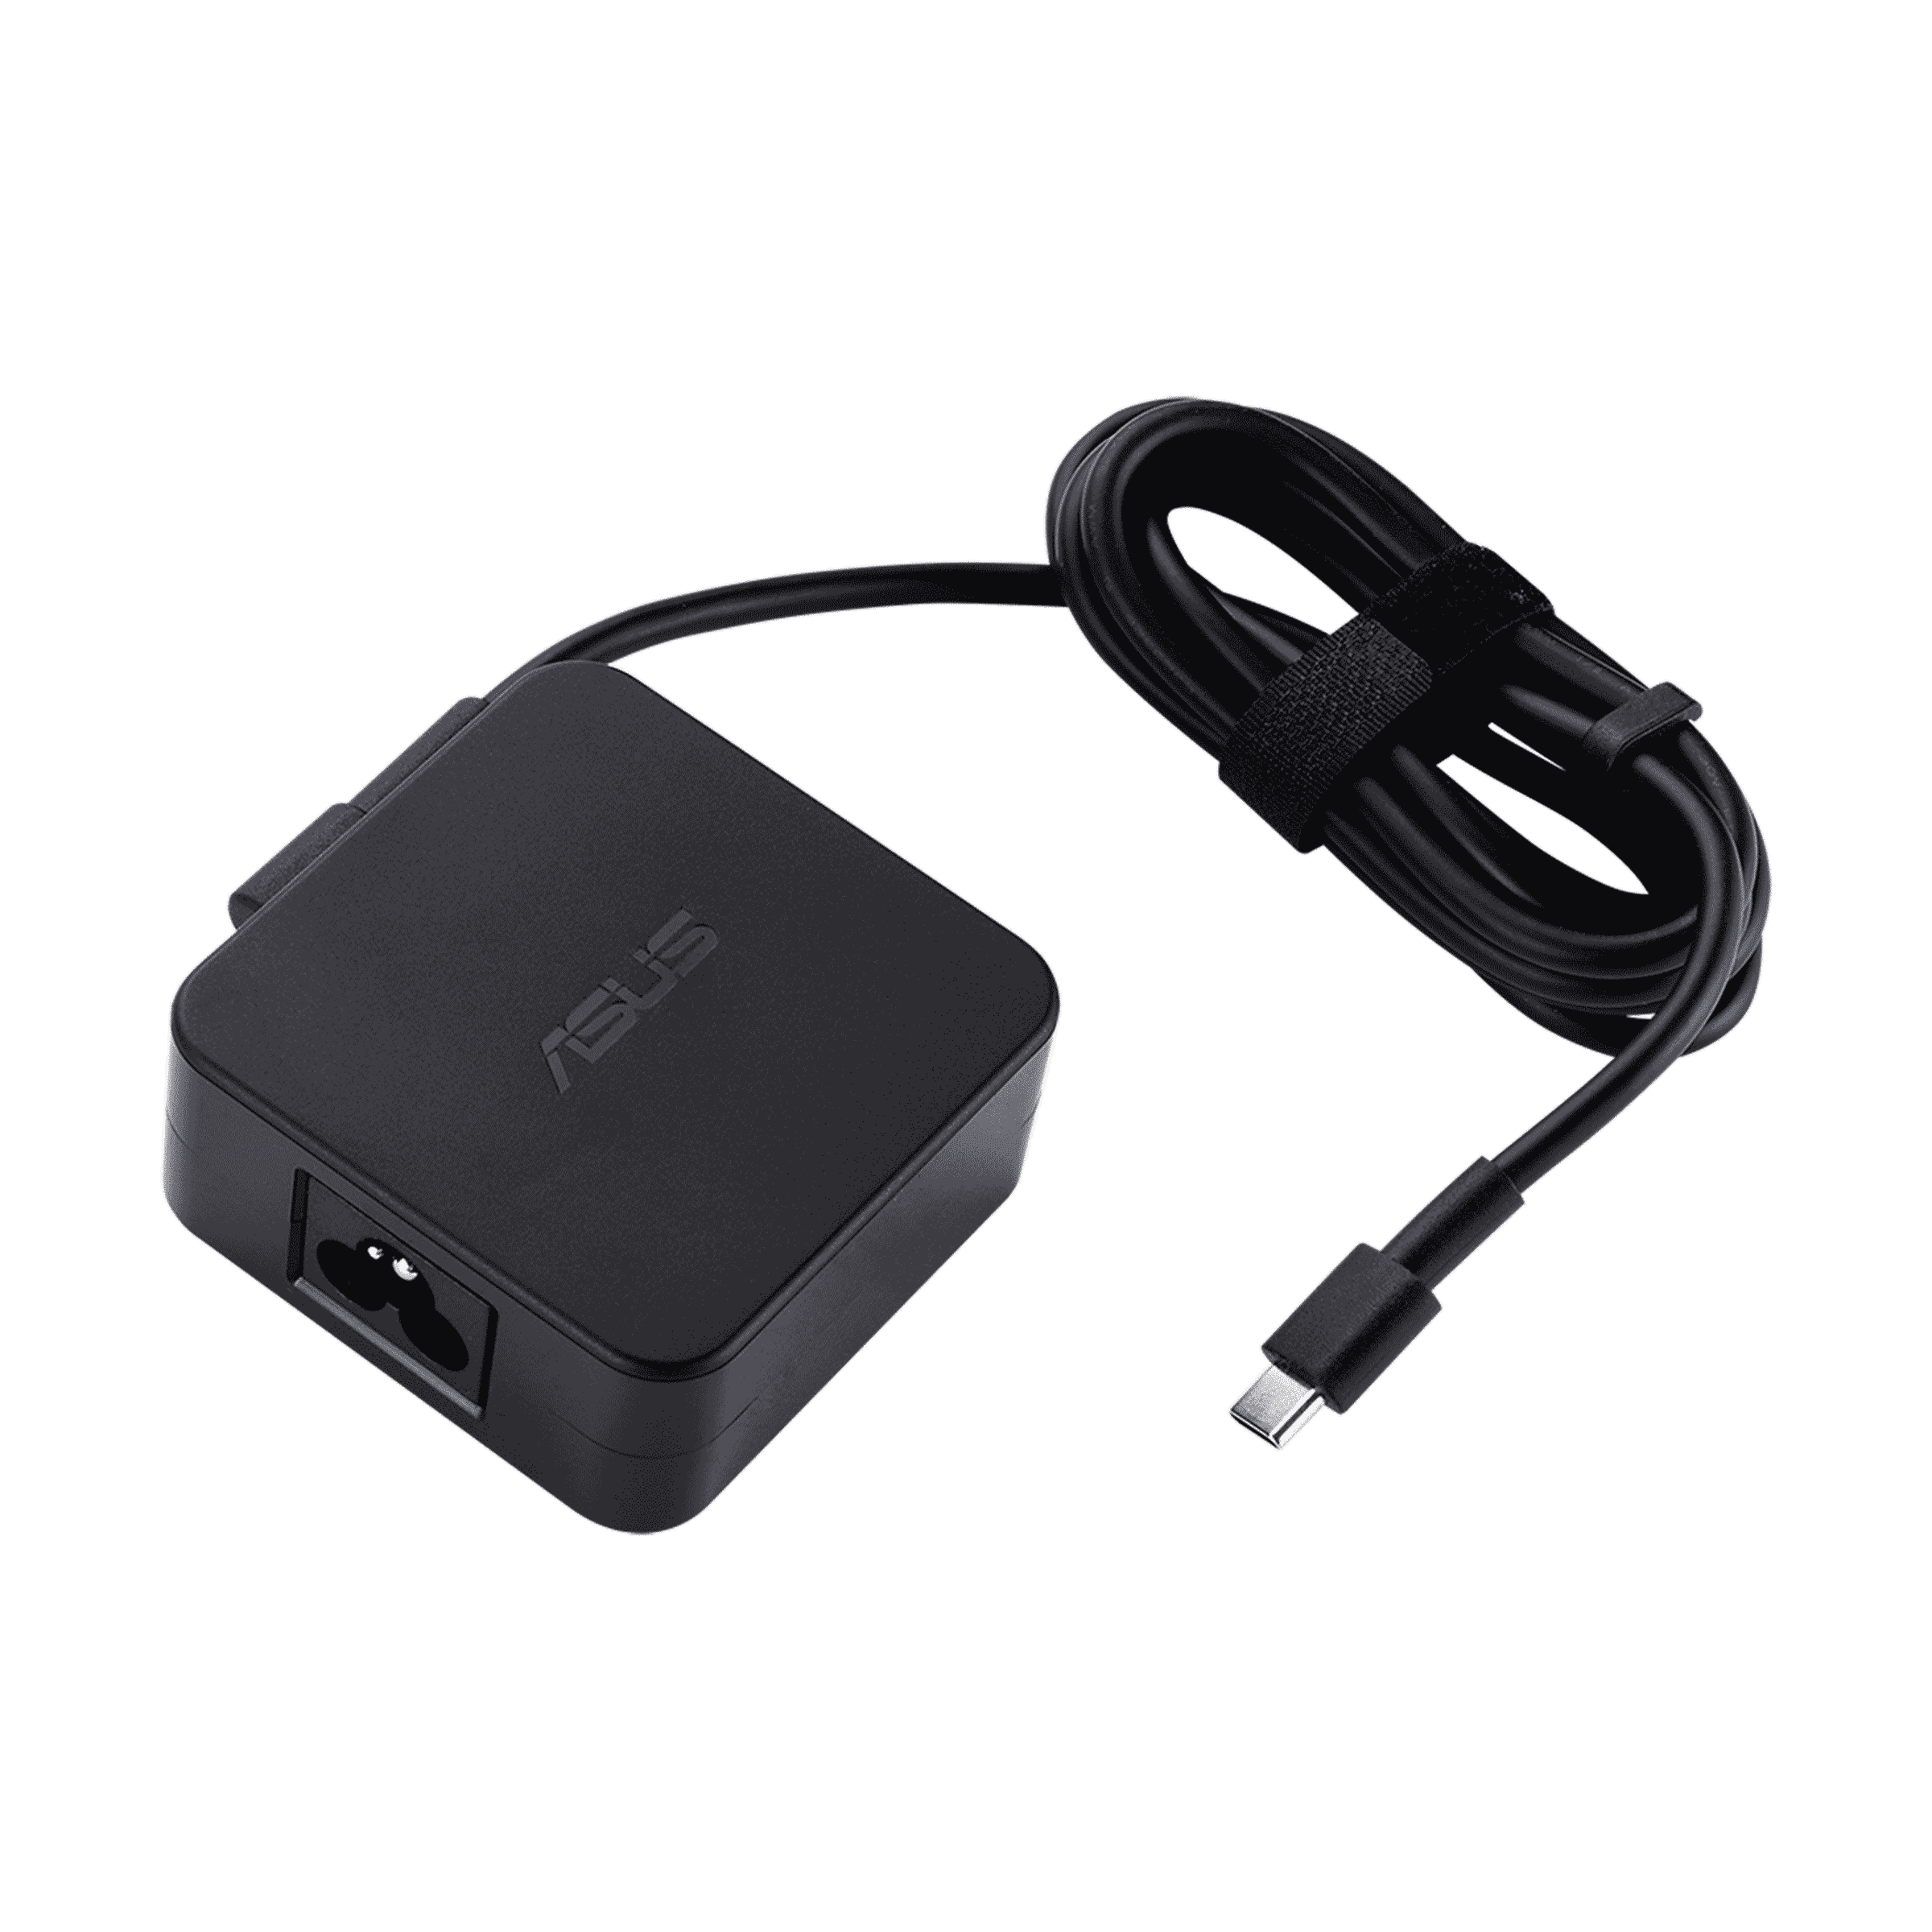 Type C Braided 3ft Charge and Sync Cable for ASUS ZenBook Pro 14 100W BoxWave DirectSync PD Cable - USB-C to USB-C ASUS ZenBook Pro 14 3ft - Jet Black Cable UX450 UX450 